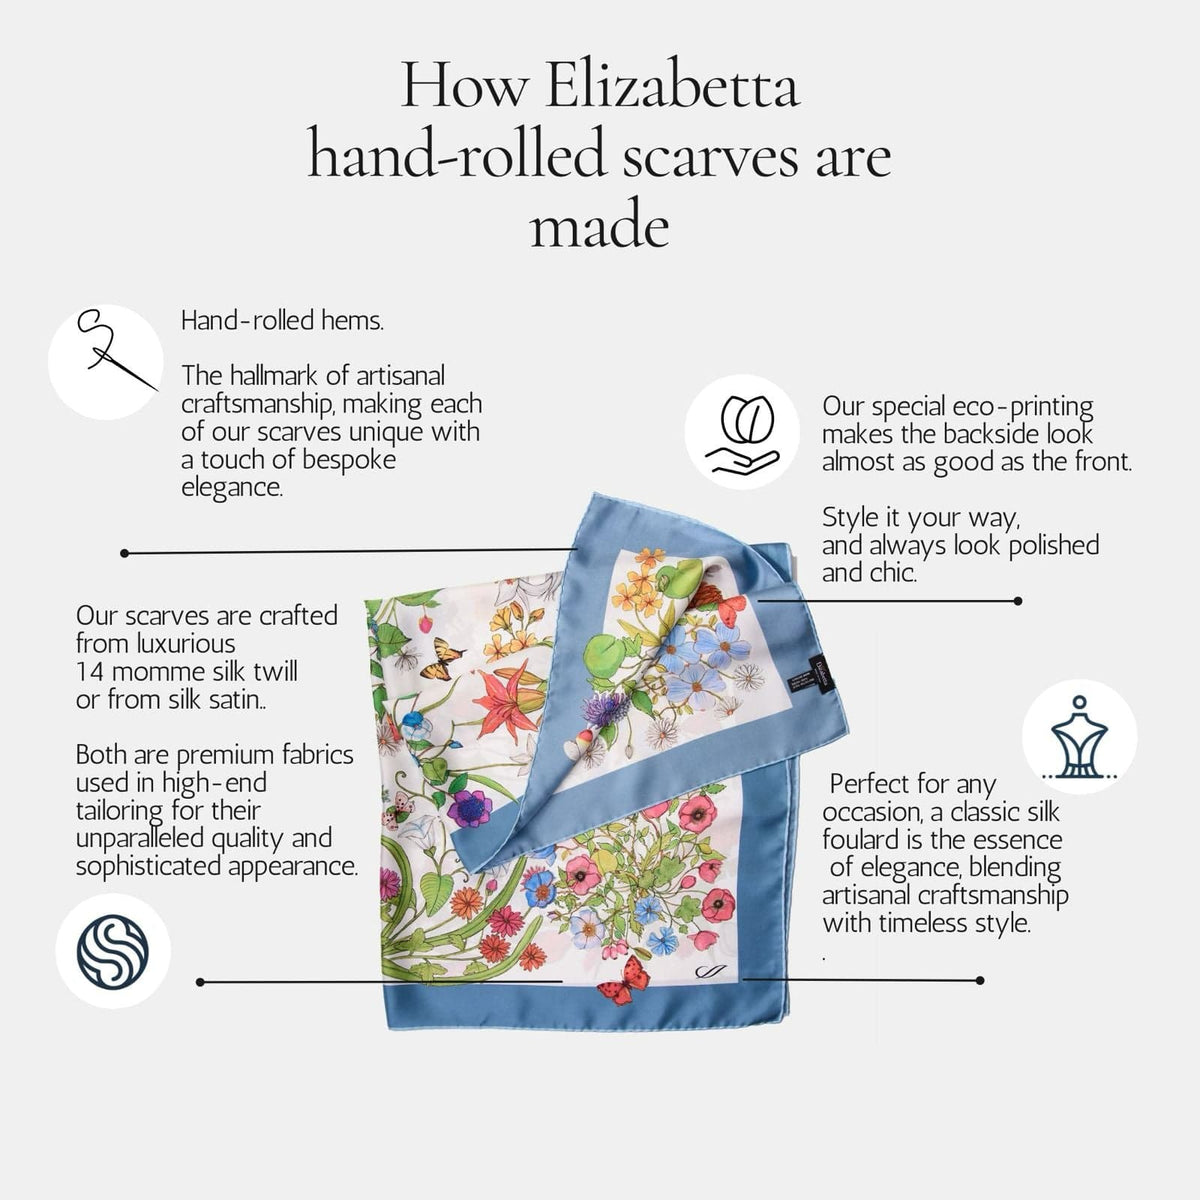 How Elizabetta handrolled scarves are made